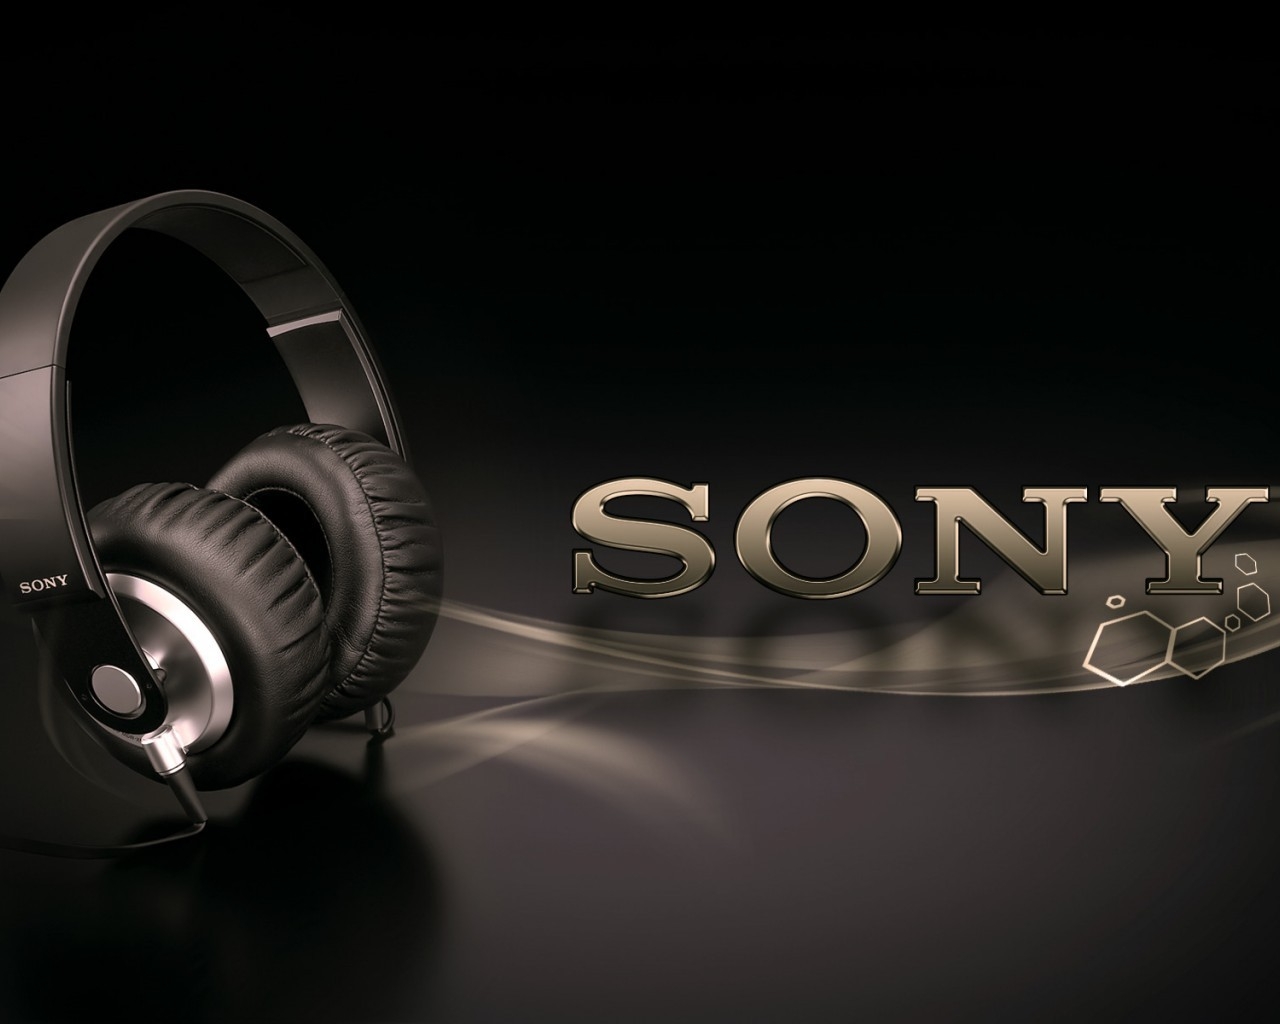 Professional Sony Headphones for 1280 x 1024 resolution